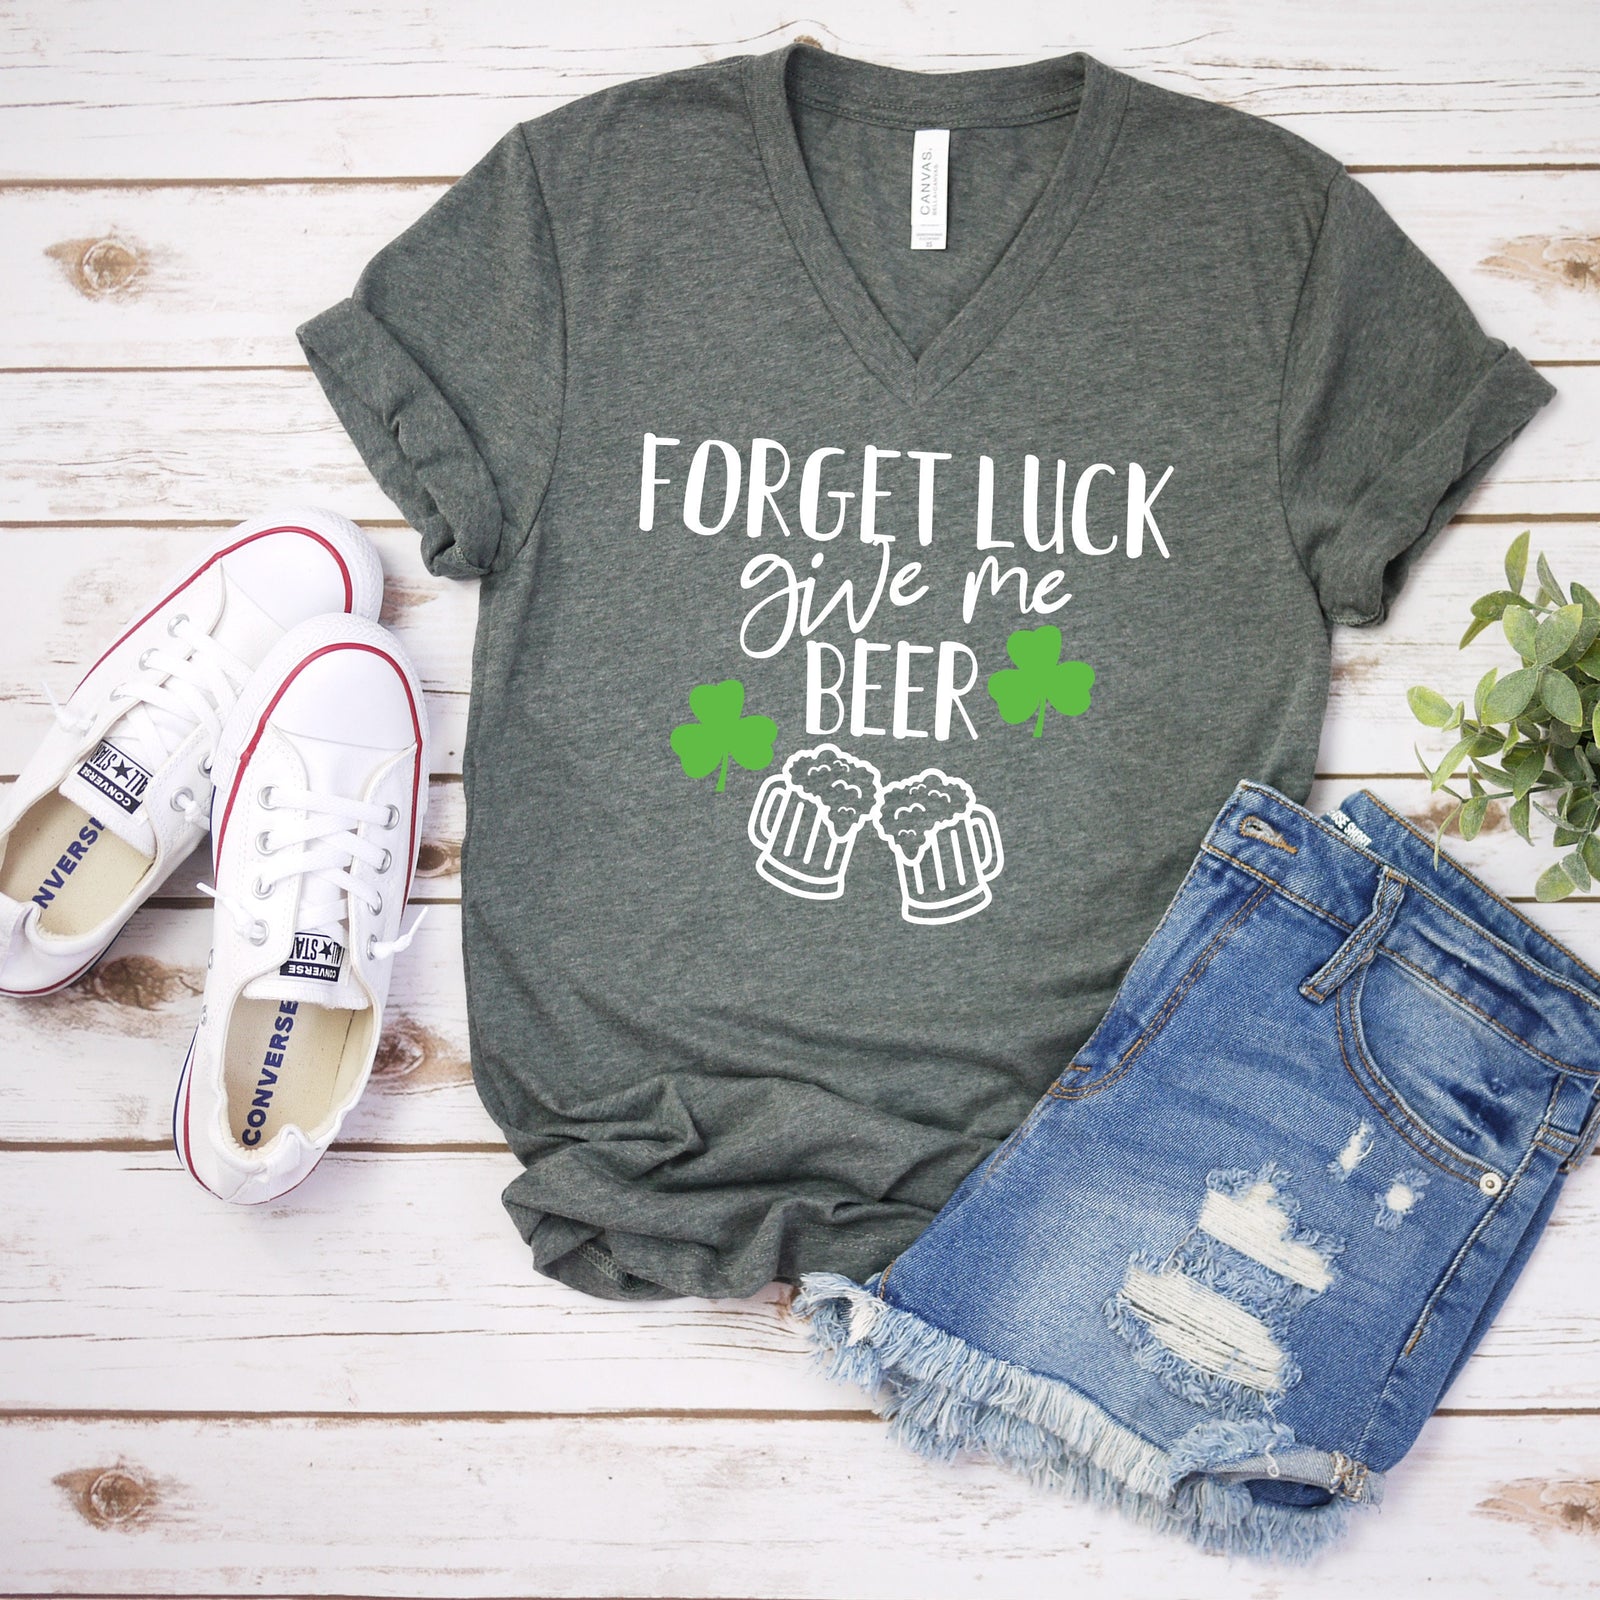 Forget Luck Give Me Beer T Shirt - Funny Beer Drinker Shirt - Saint Patrick's Day Humor Shirt